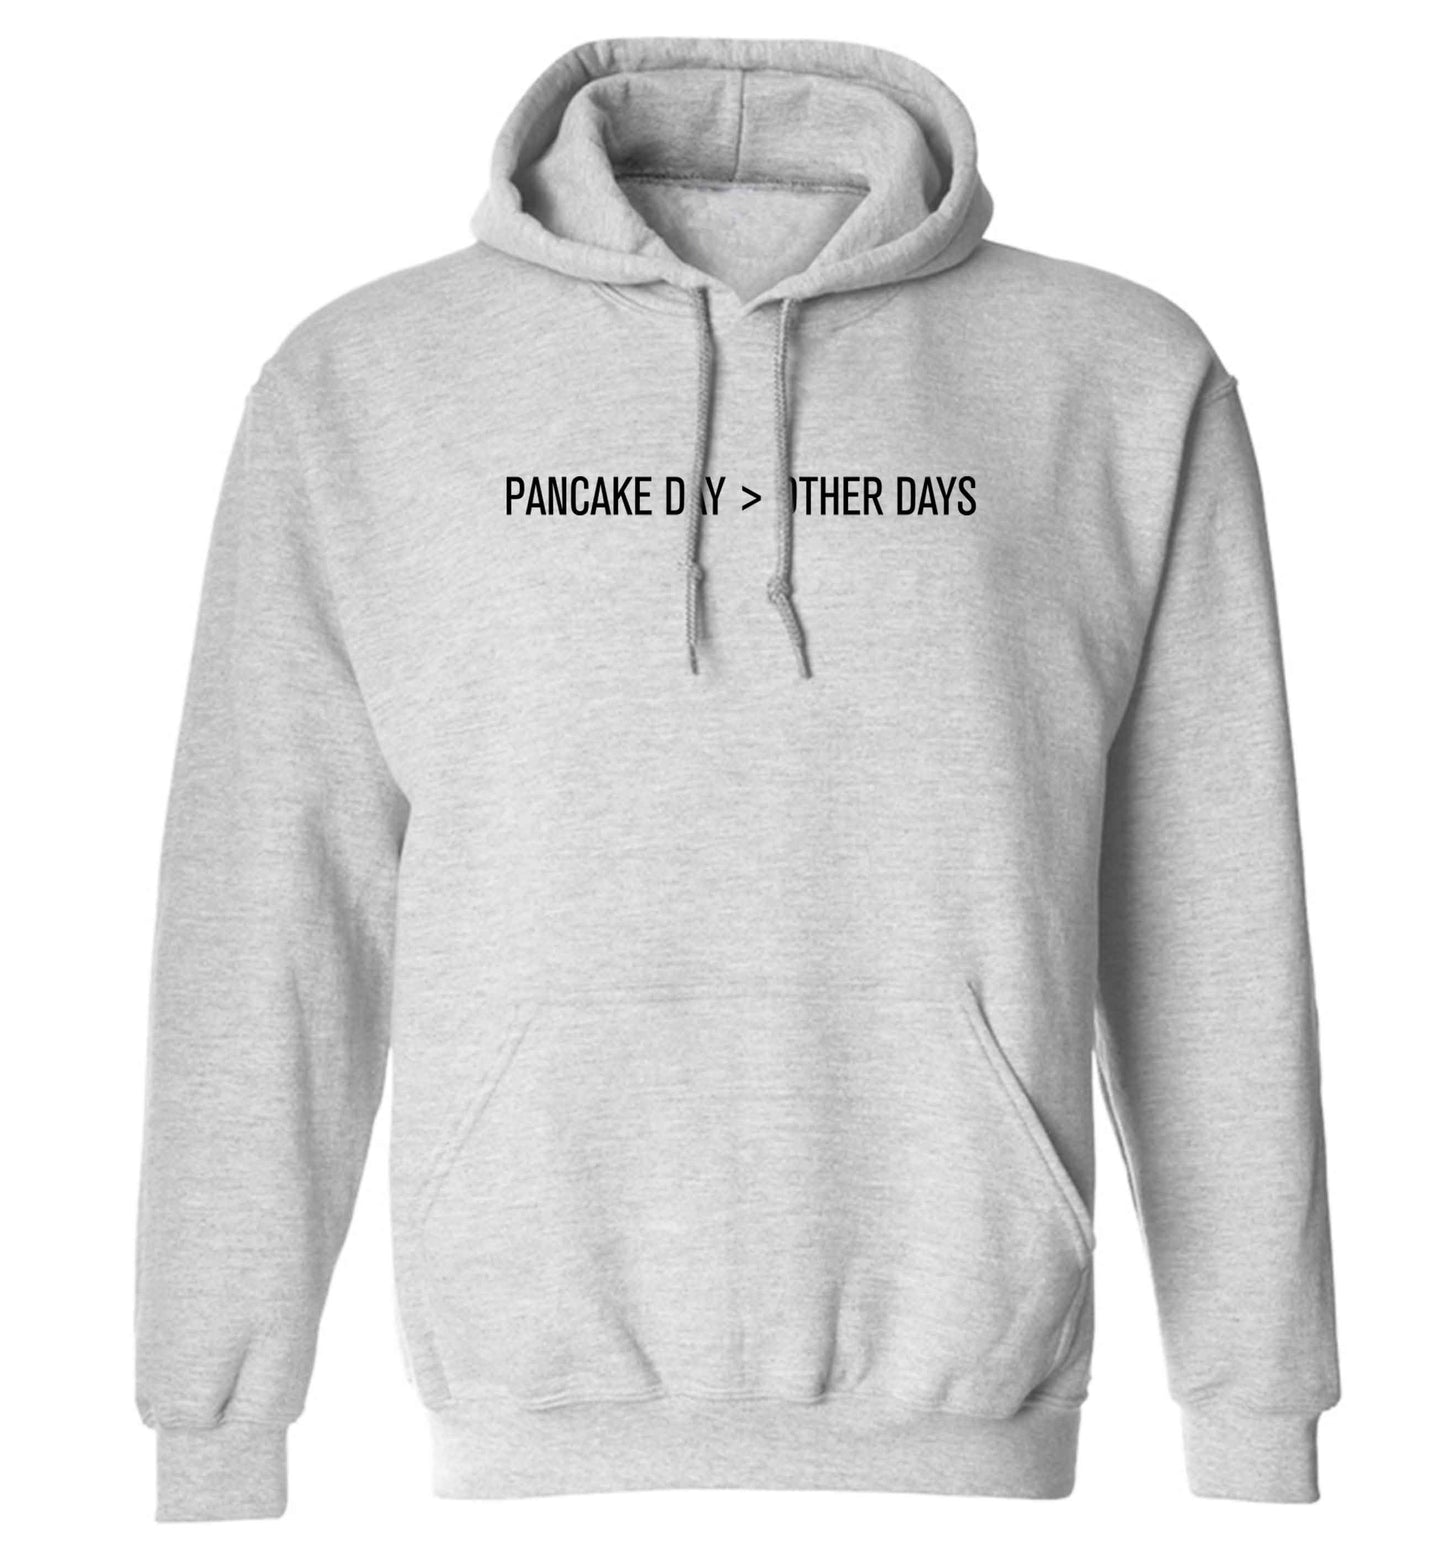 Pancake day > other days adults unisex grey hoodie 2XL